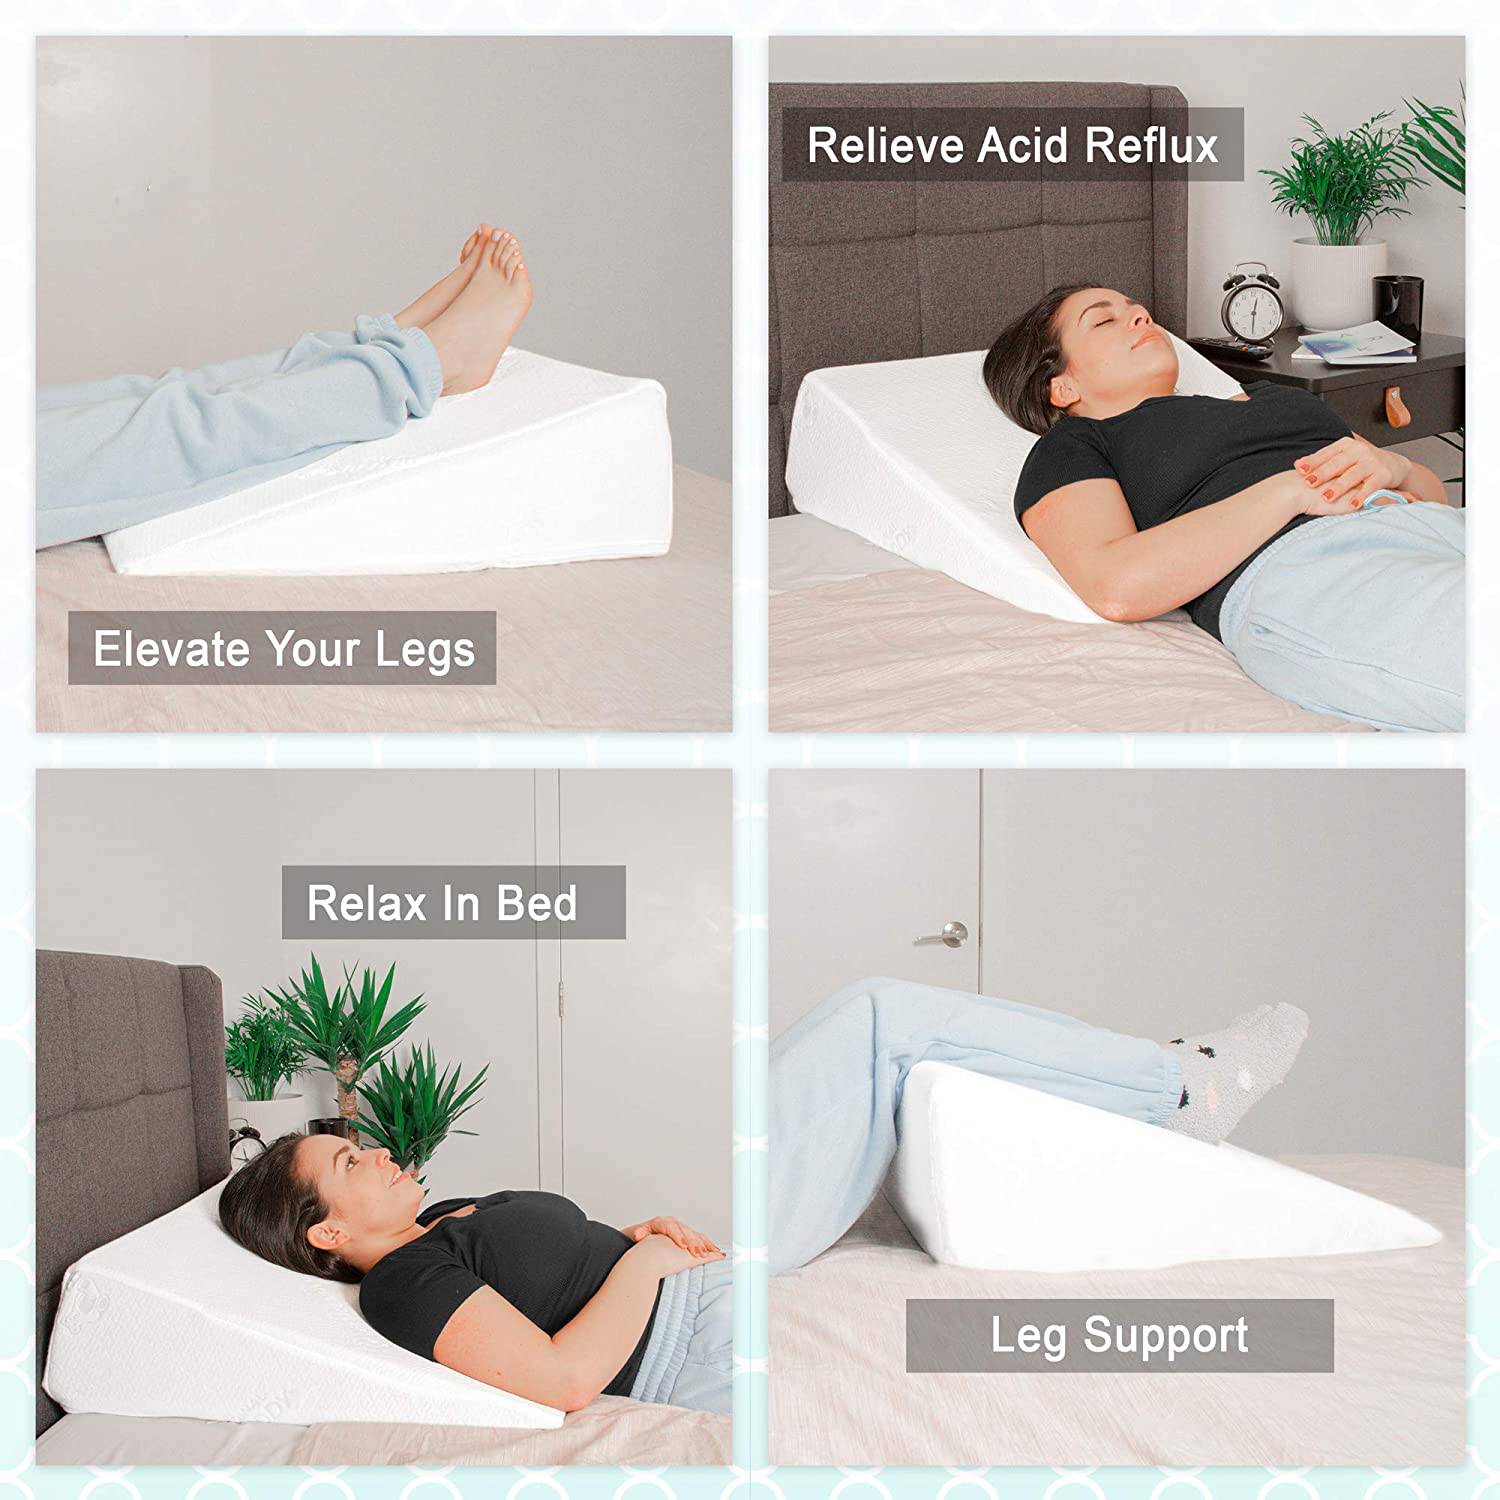 Foam Wedge Pillow for Back Pain and Body Positioning (3 in 1)